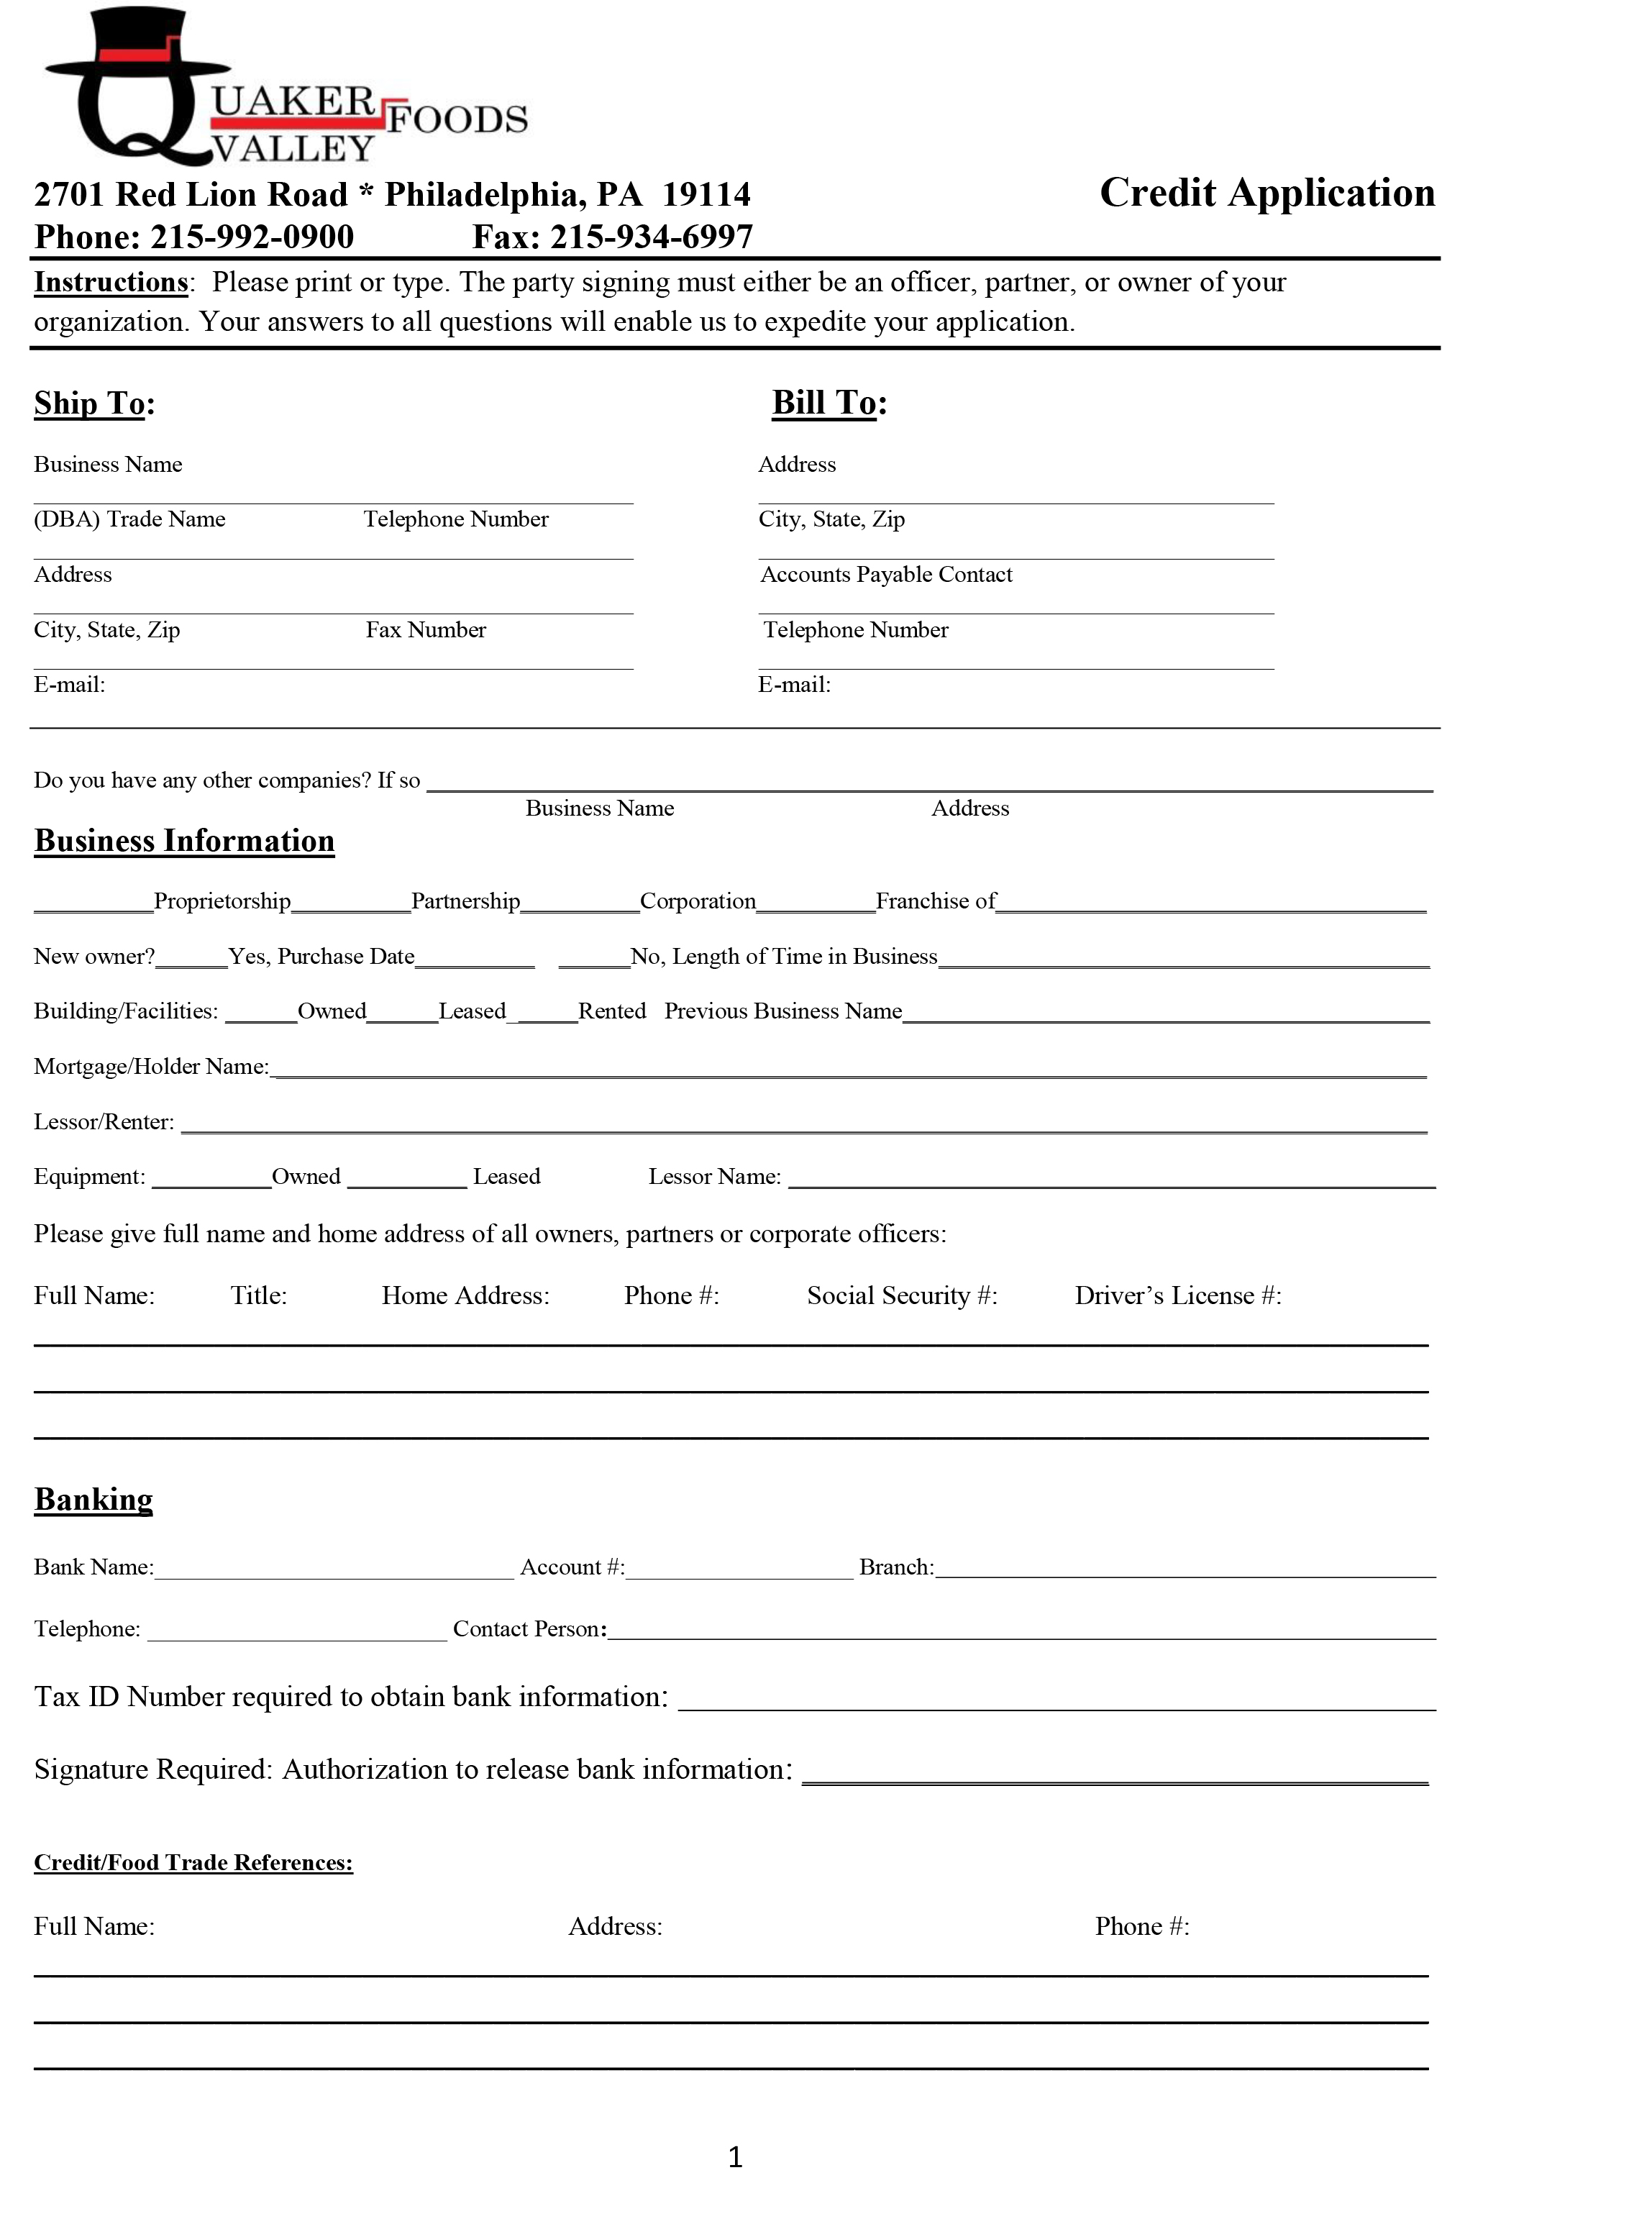 Quaker Valley Foods Credit Application